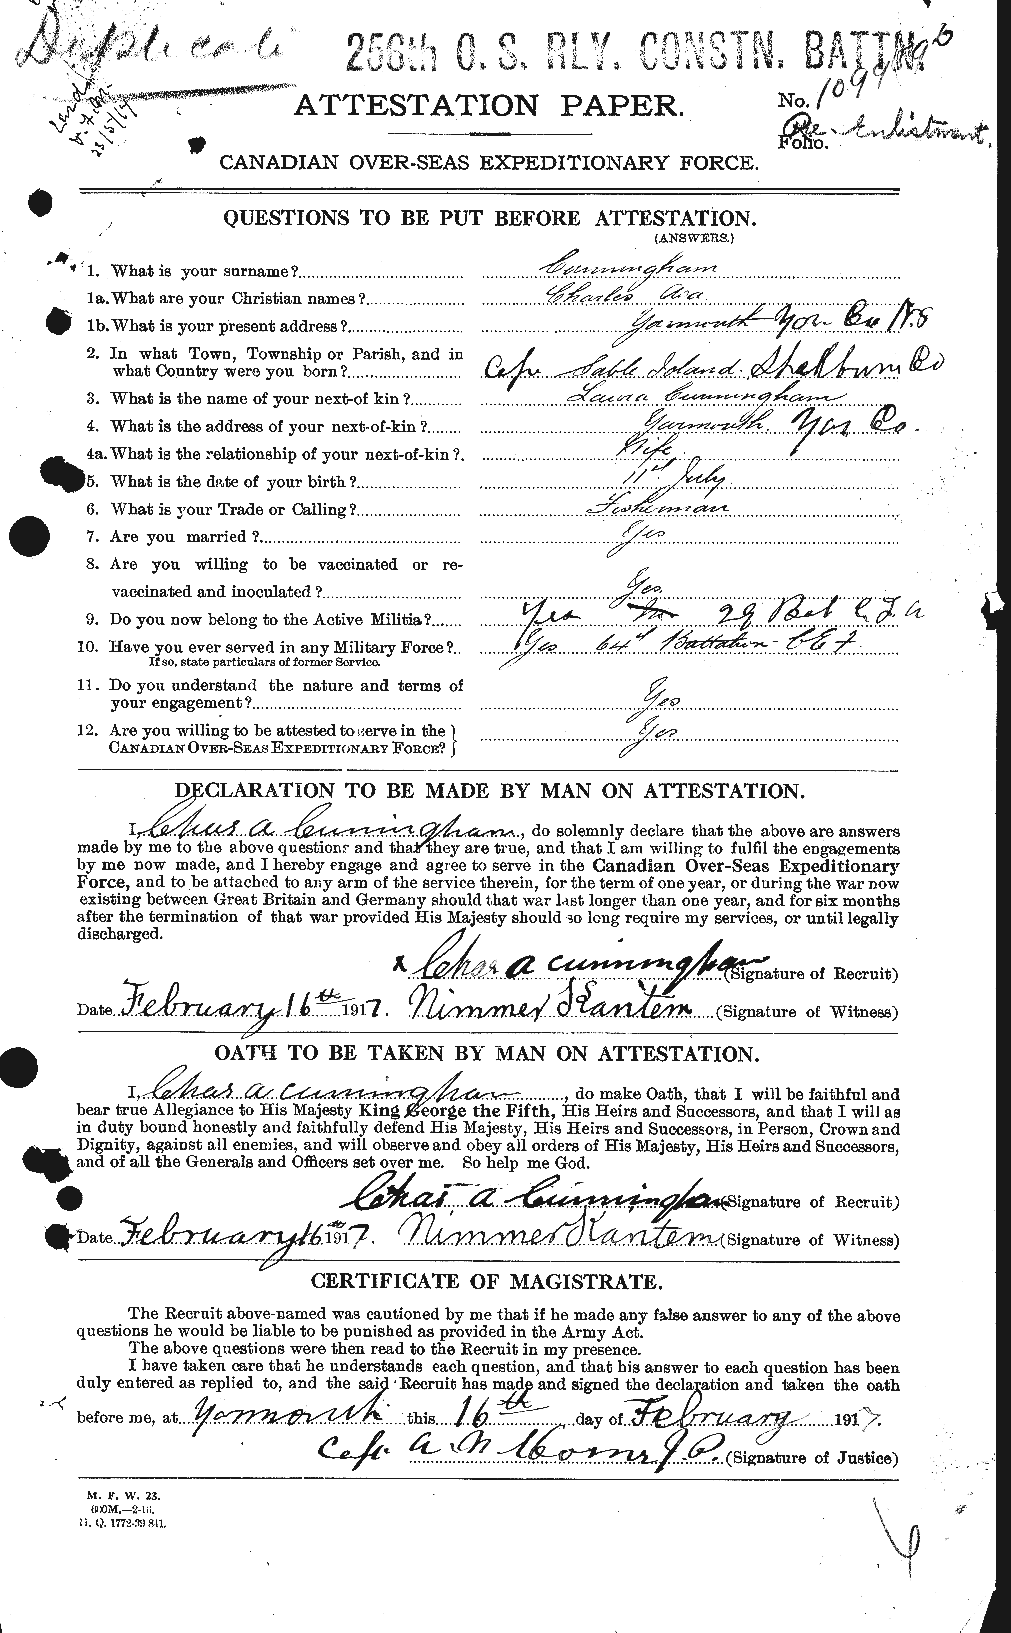 Personnel Records of the First World War - CEF 072035a